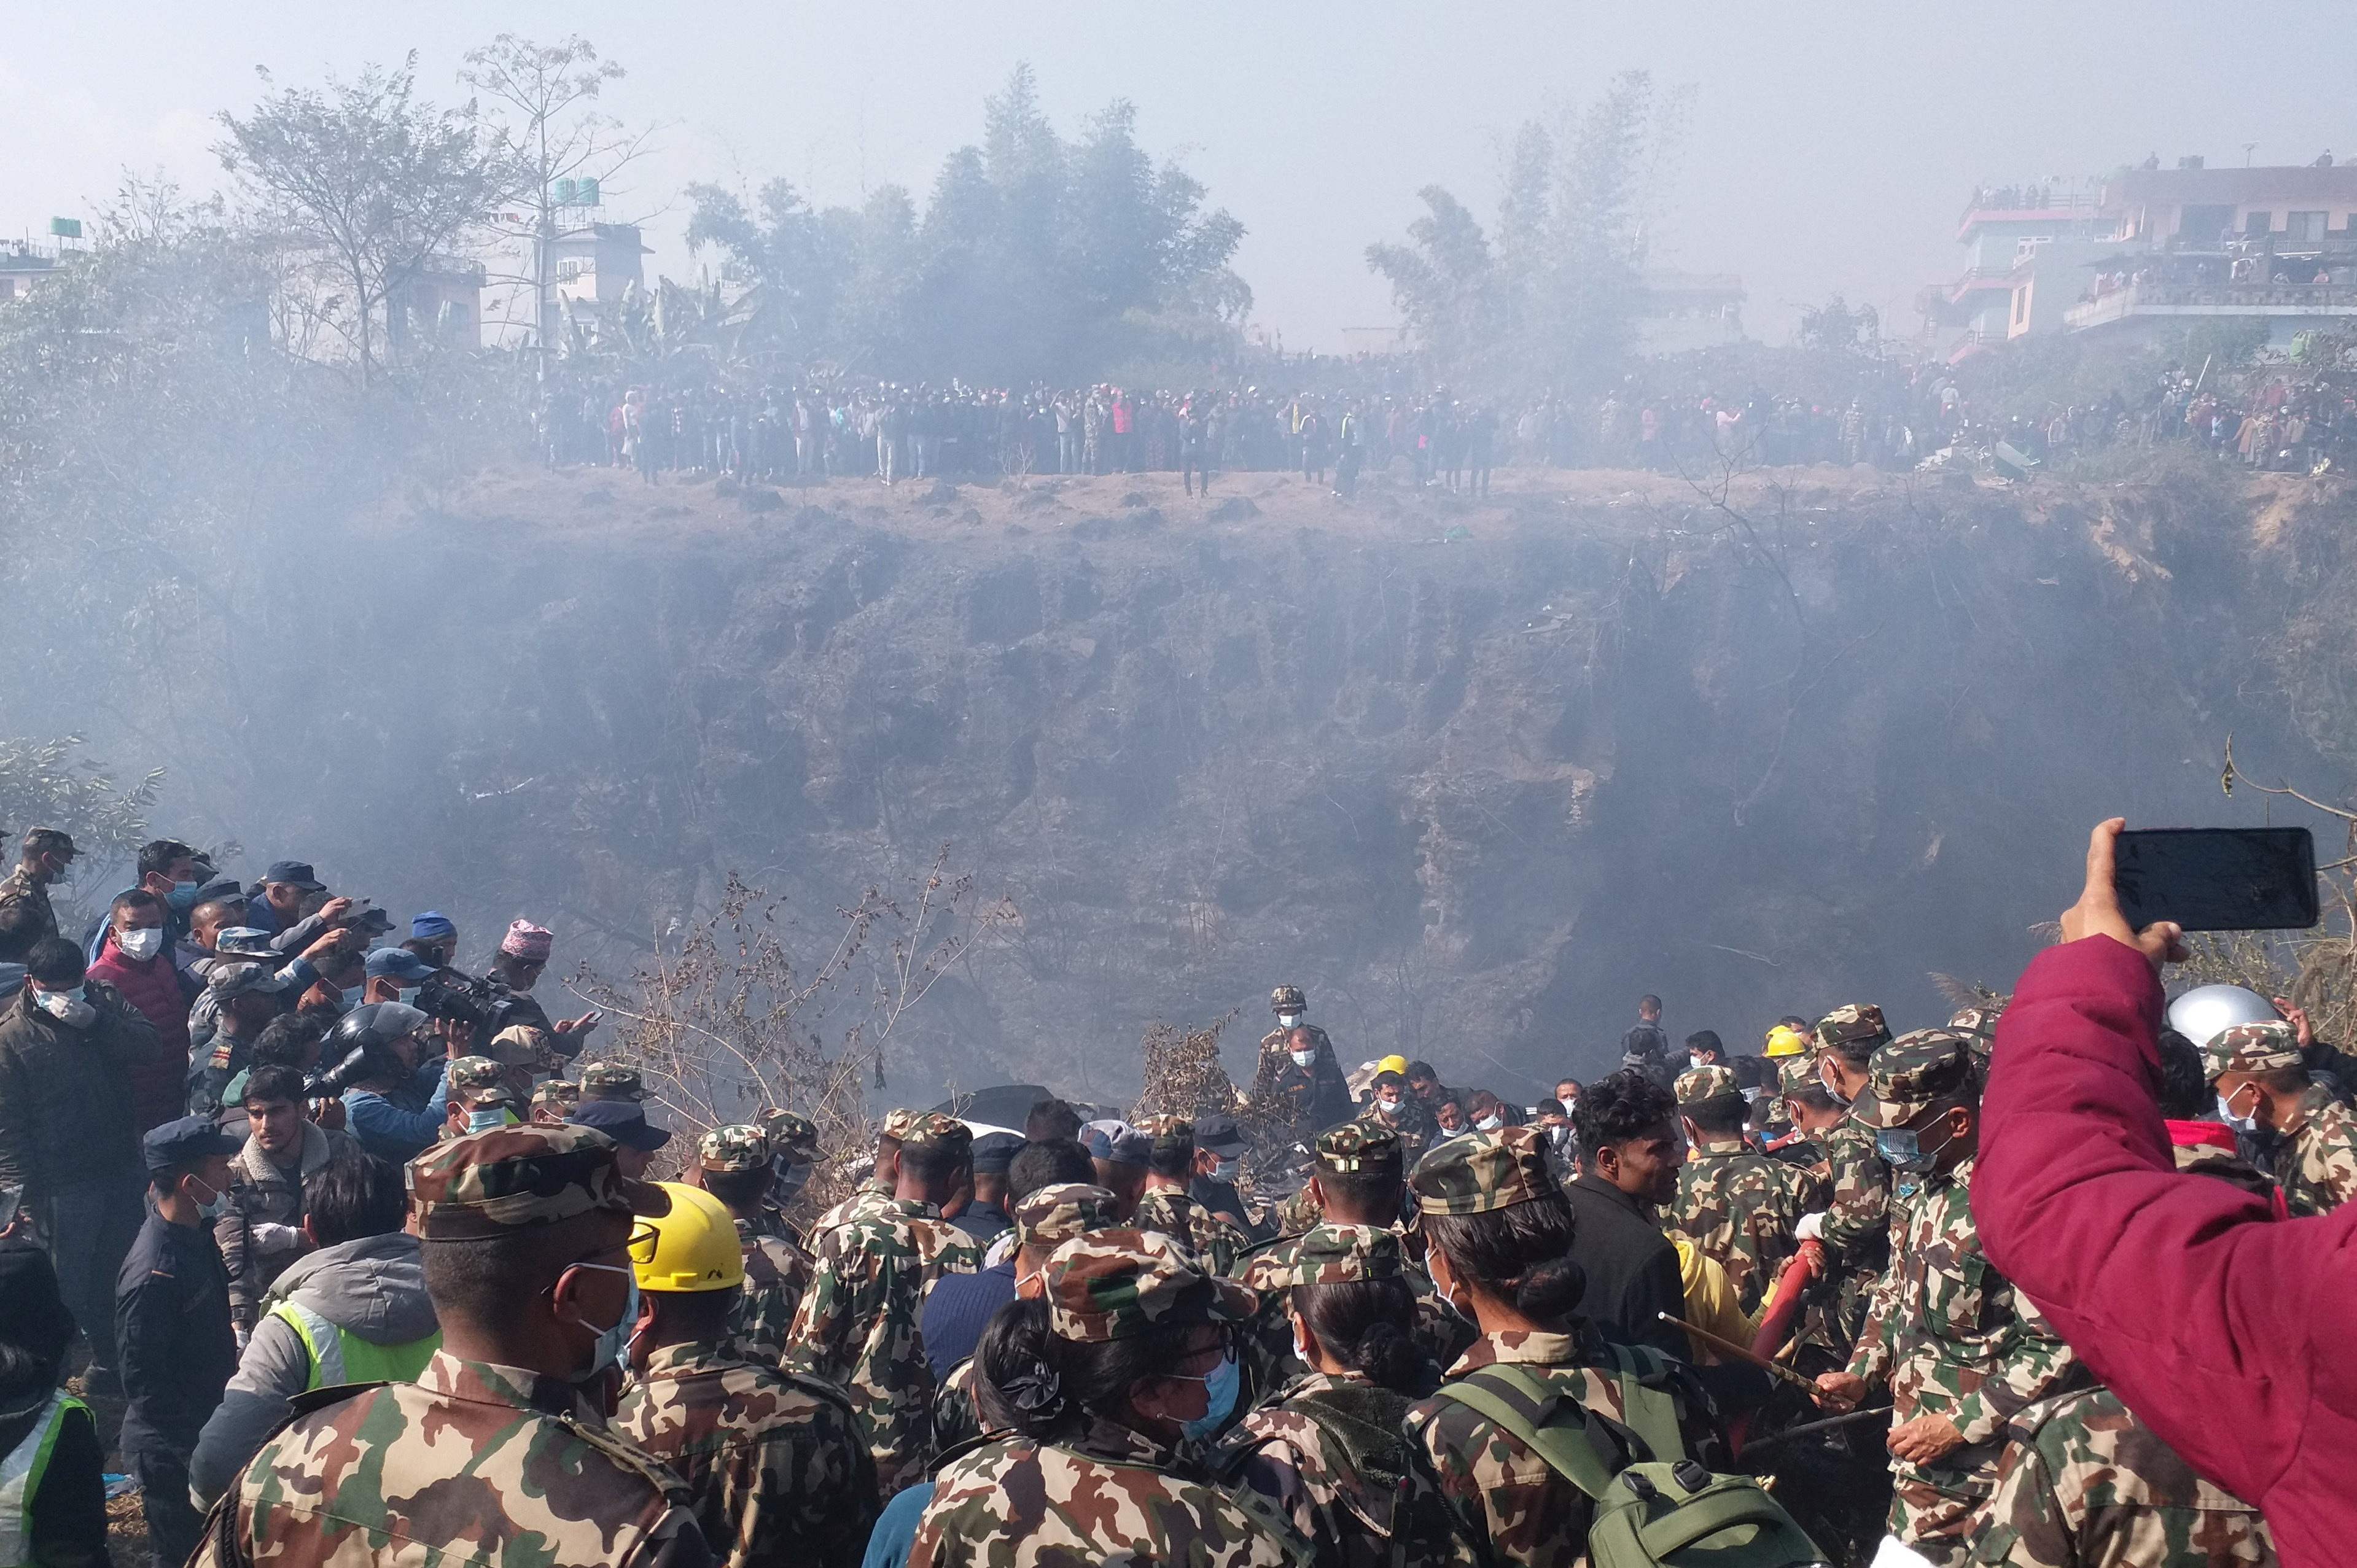 The Nepalese authorities have recovered at least 25 bodies after the accident, said Deputy Deputy Inspector of the Nepalese Police, Rudra Thapa.  (Reuters)